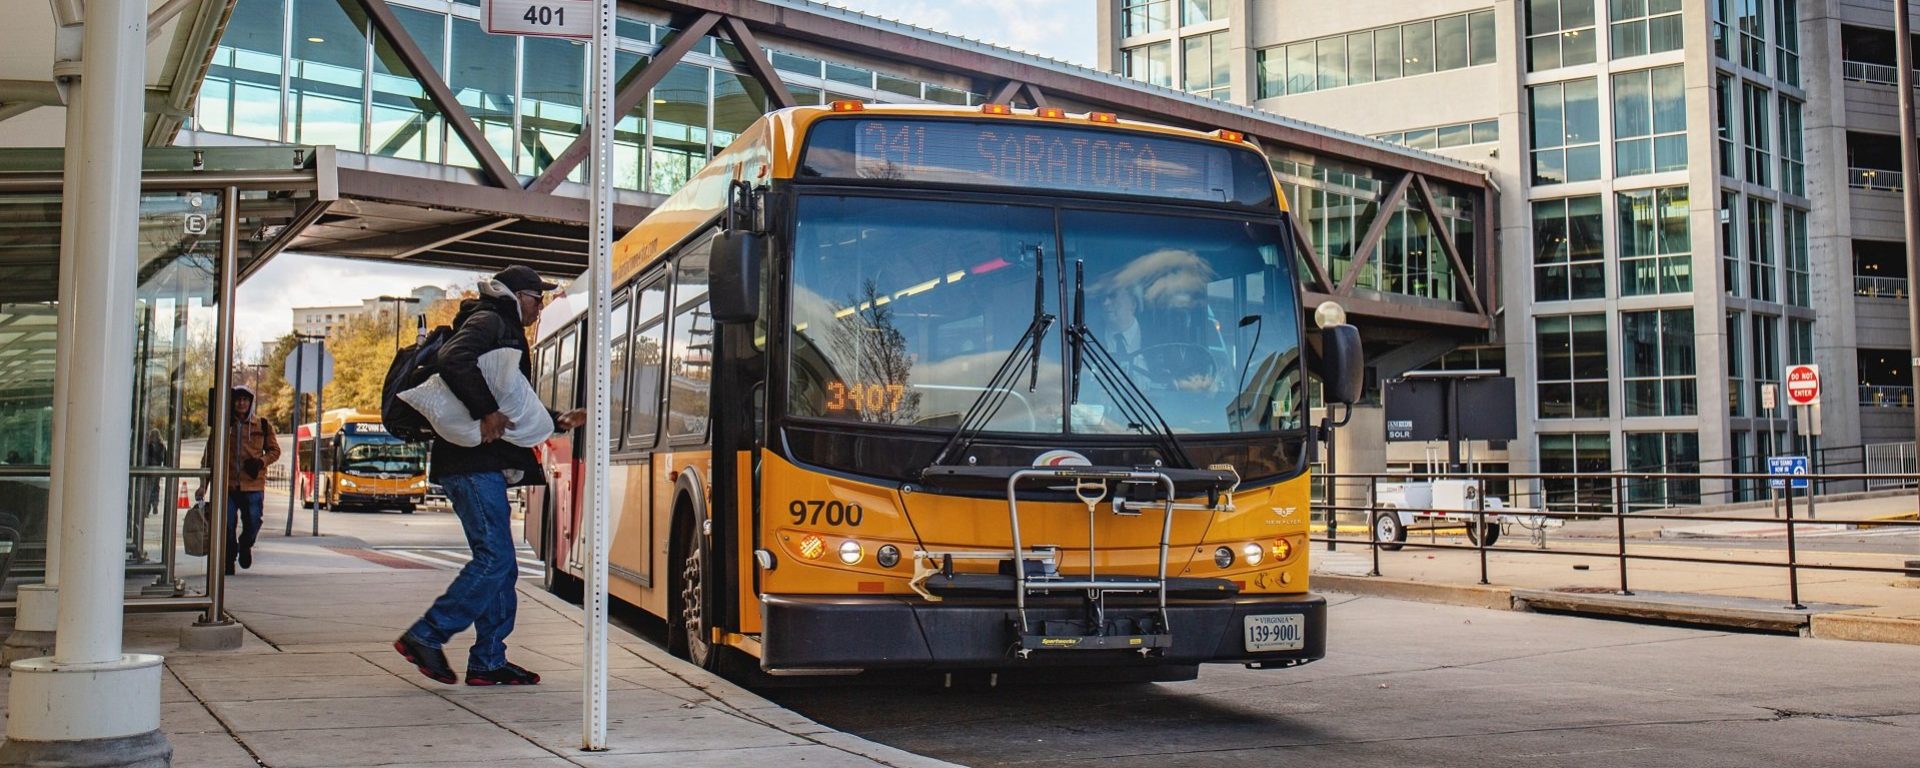 passenger yellow bus Fairfax connector county Transdev north america public transit mobility